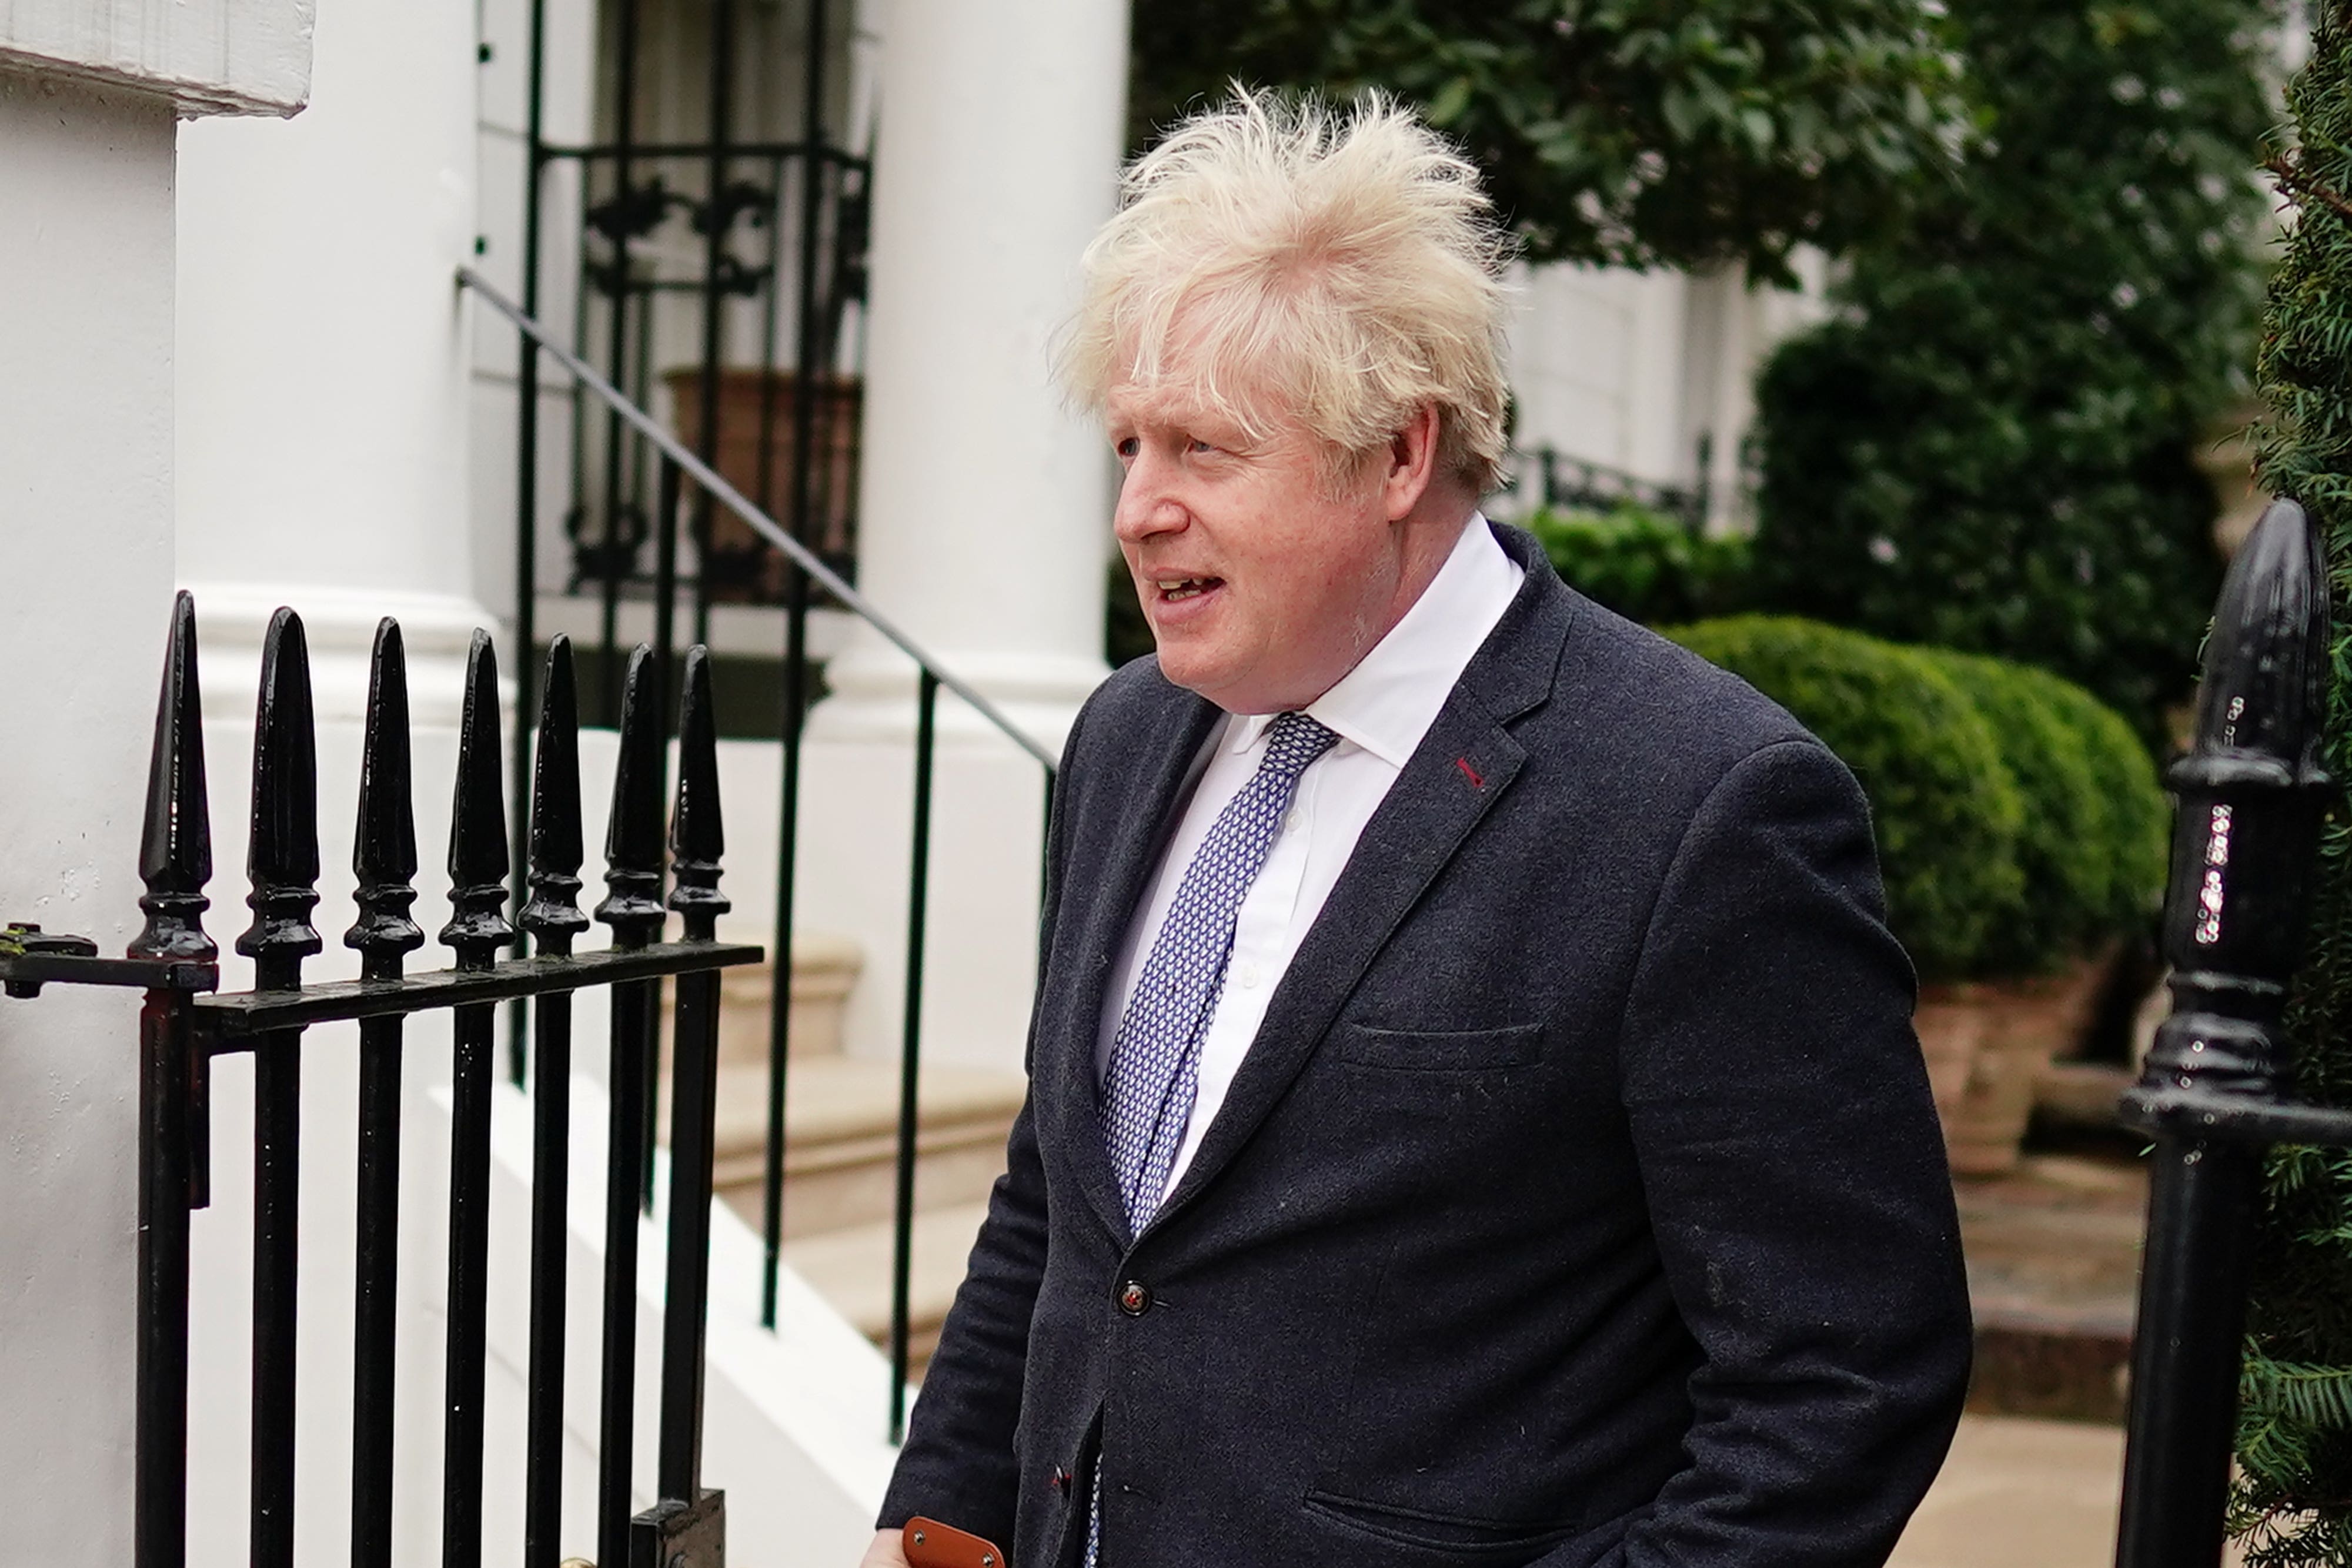 Former prime minister Boris Johnson wanted to be injected with Covid on TV to show it did not pose a threat, the official inquiry was told (Aaron Chown/PA)